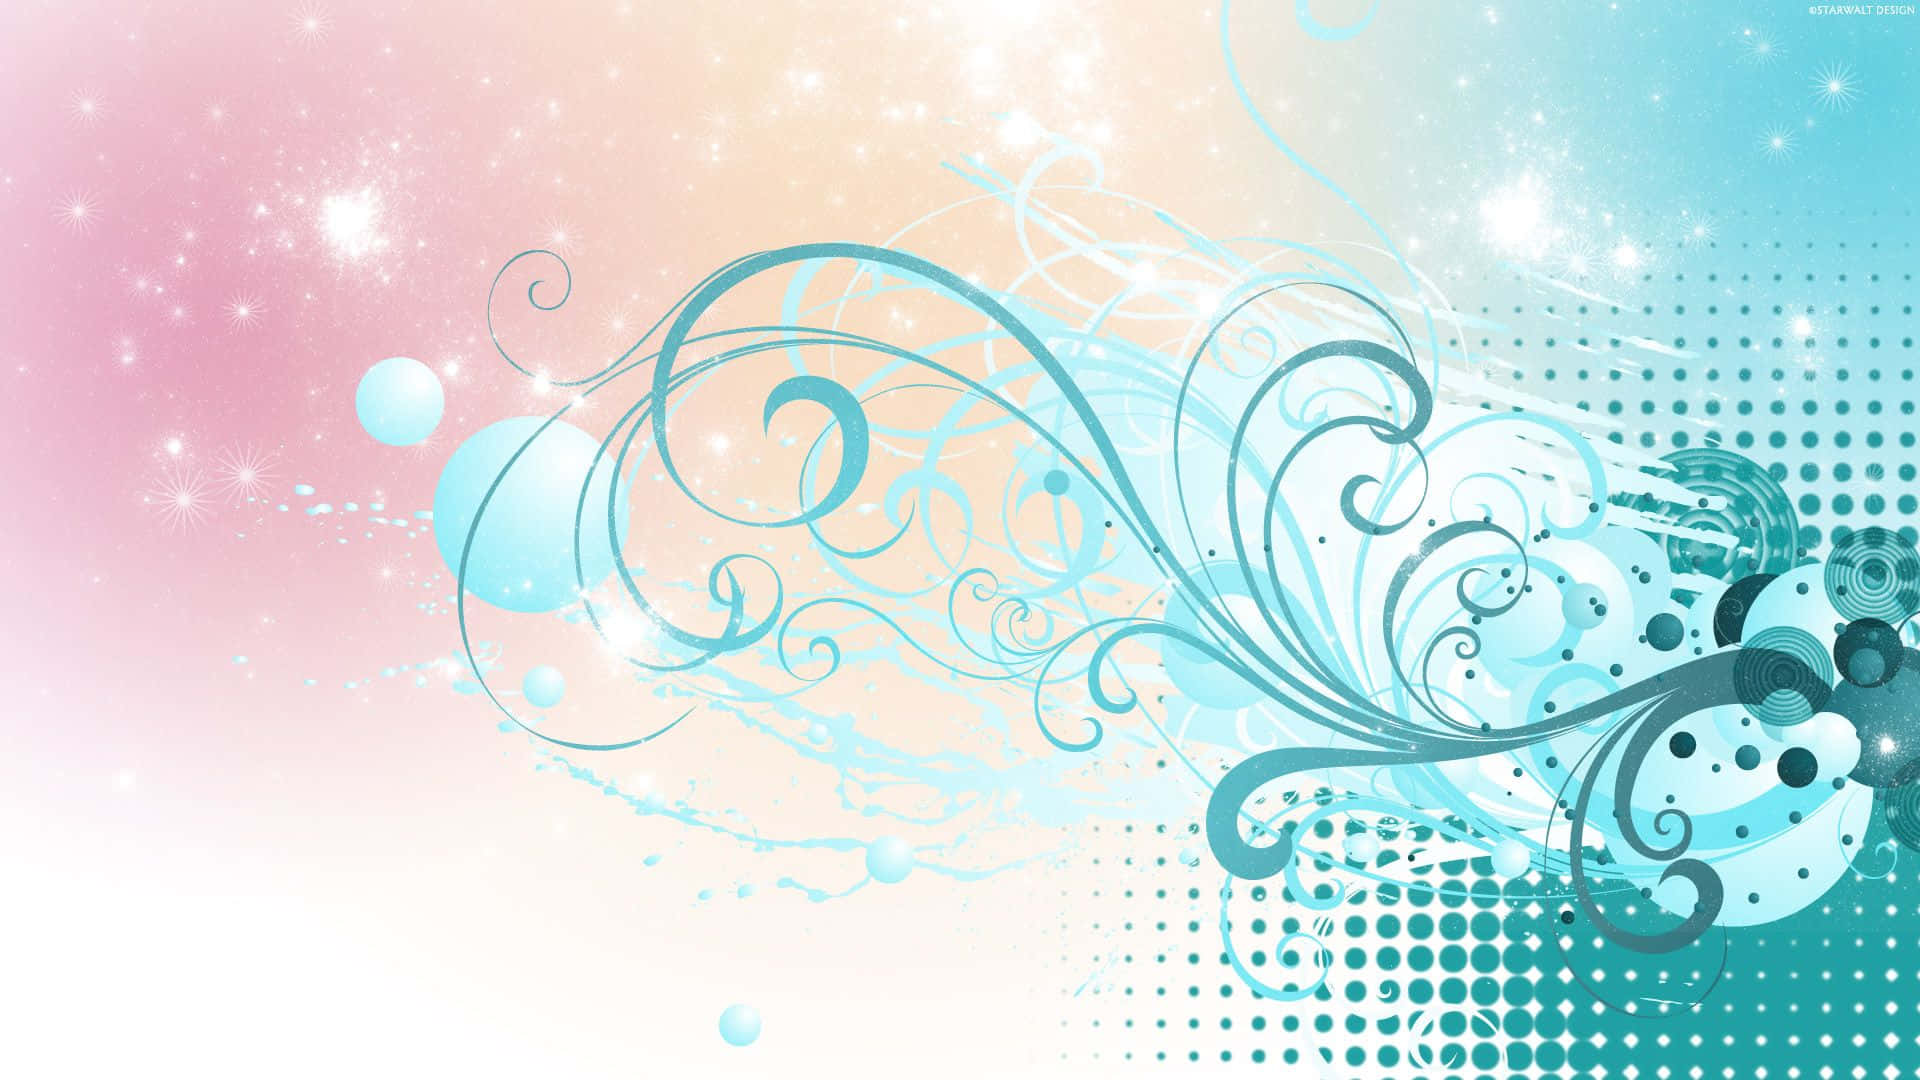 Bright Background Of Sparkles And Swirls